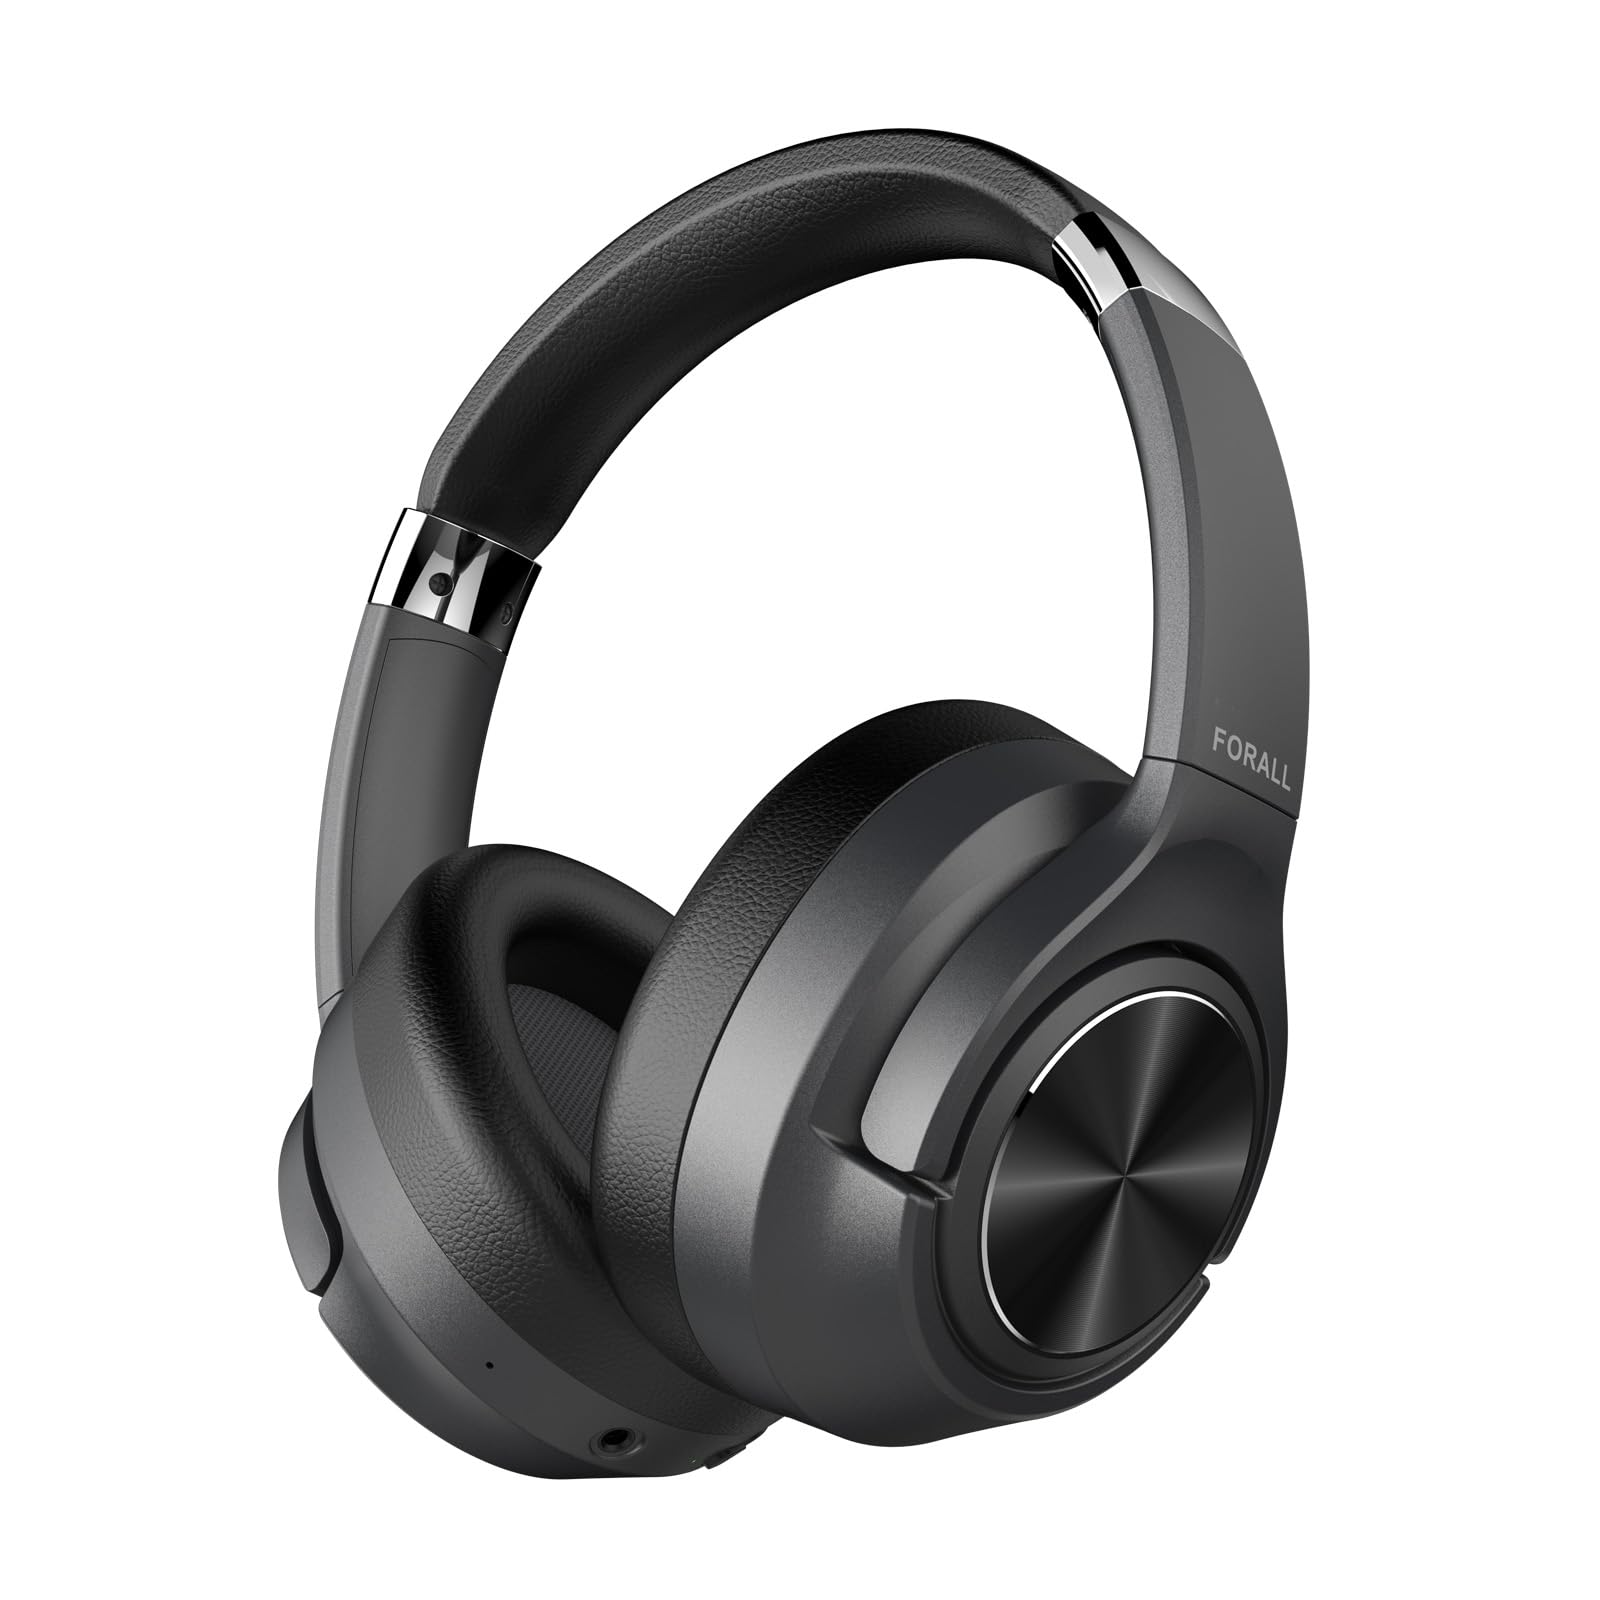 FORALL U35 Hybrid Active Noise Cancelling Headphones